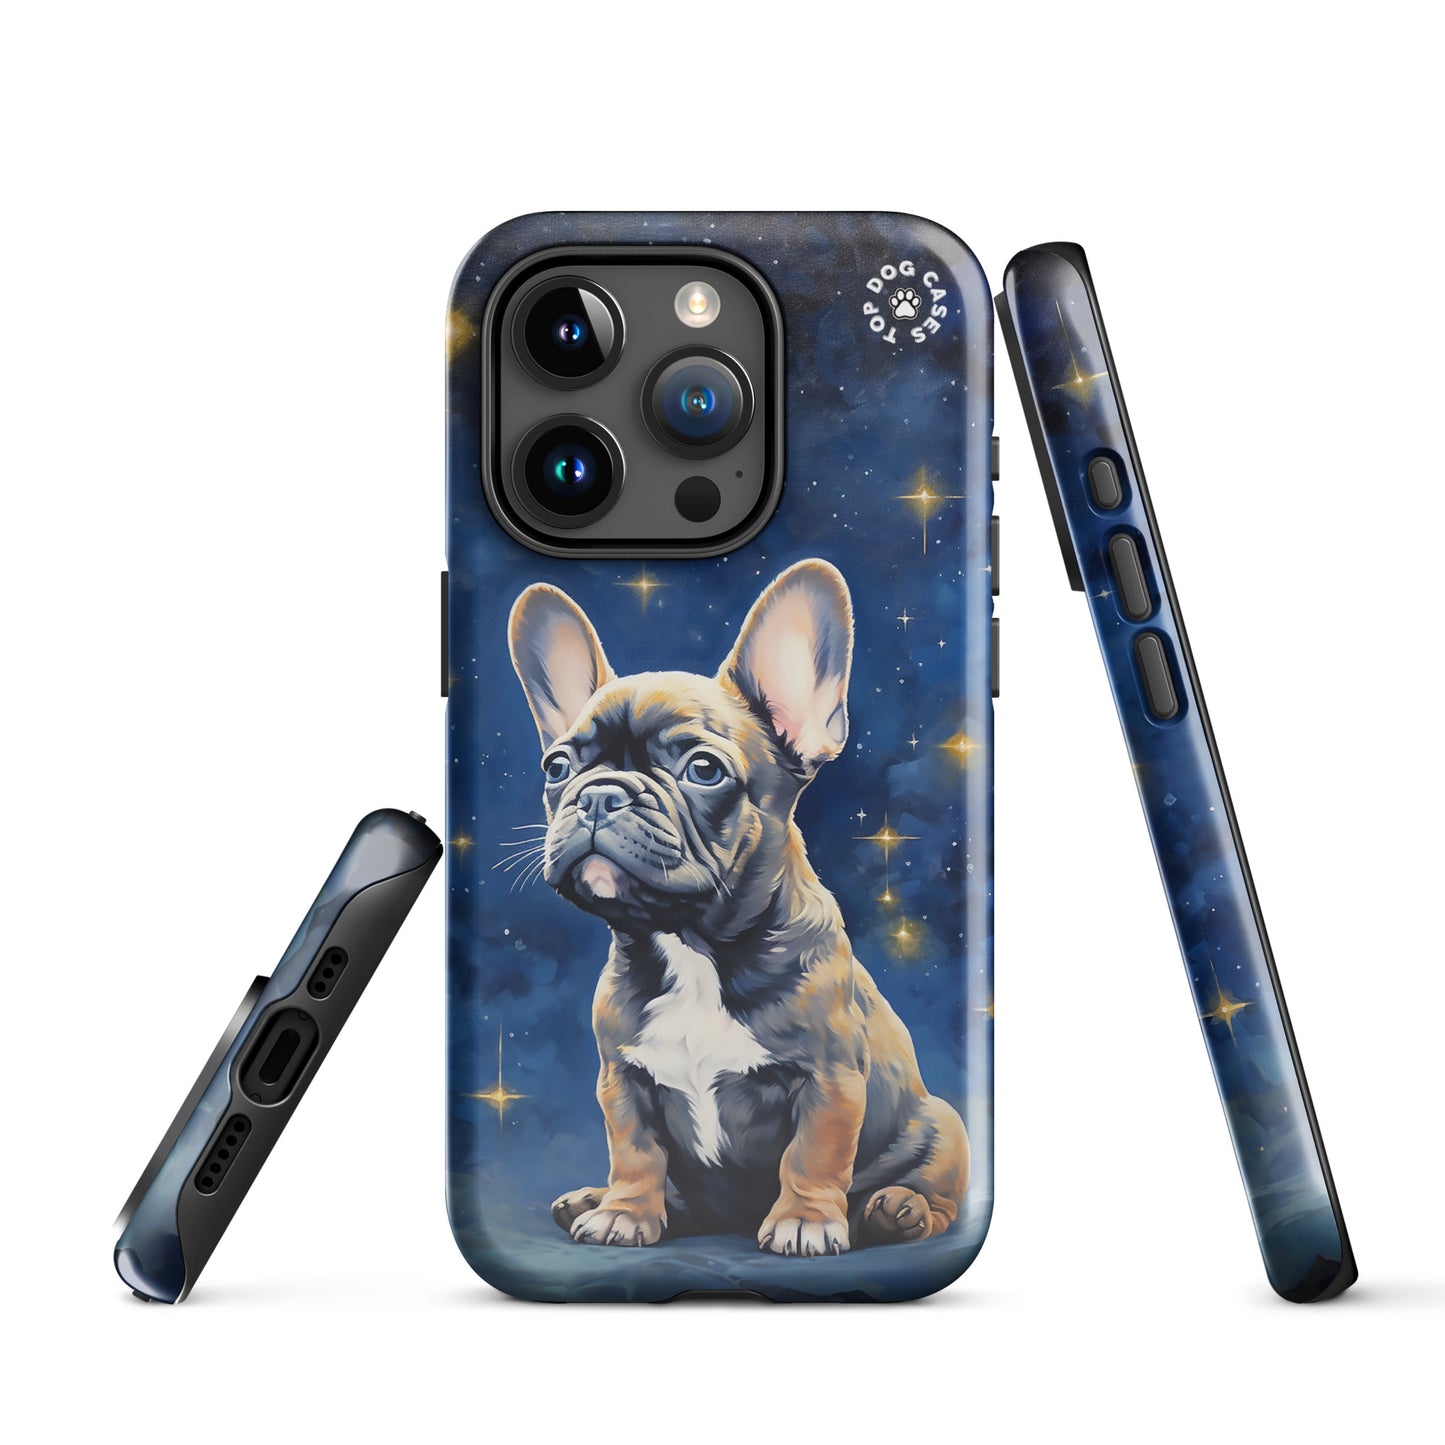 Cute iPhone Cases French Bulldog - Top Dog Cases - #French Bulldog, #FrenchBulldog, #iPhone, #iPhone11, #iphone11case, #iPhone12, #iPhone12case, #iPhone13, #iPhone13case, #iPhone13DogCase, #iPhone13Mini, #iPhone13Pro, #iPhone13ProMax, #iPhone14, #iPhone14case, #iPhone14DogCase, #iPhone14Plus, #iPhone14Pluscase, #iPhone14Pro, #iPhone14ProMax, #iPhone14ProMaxCase, #iPhone15, #iPhone15case, #iPhonecase, #iphonedogcase